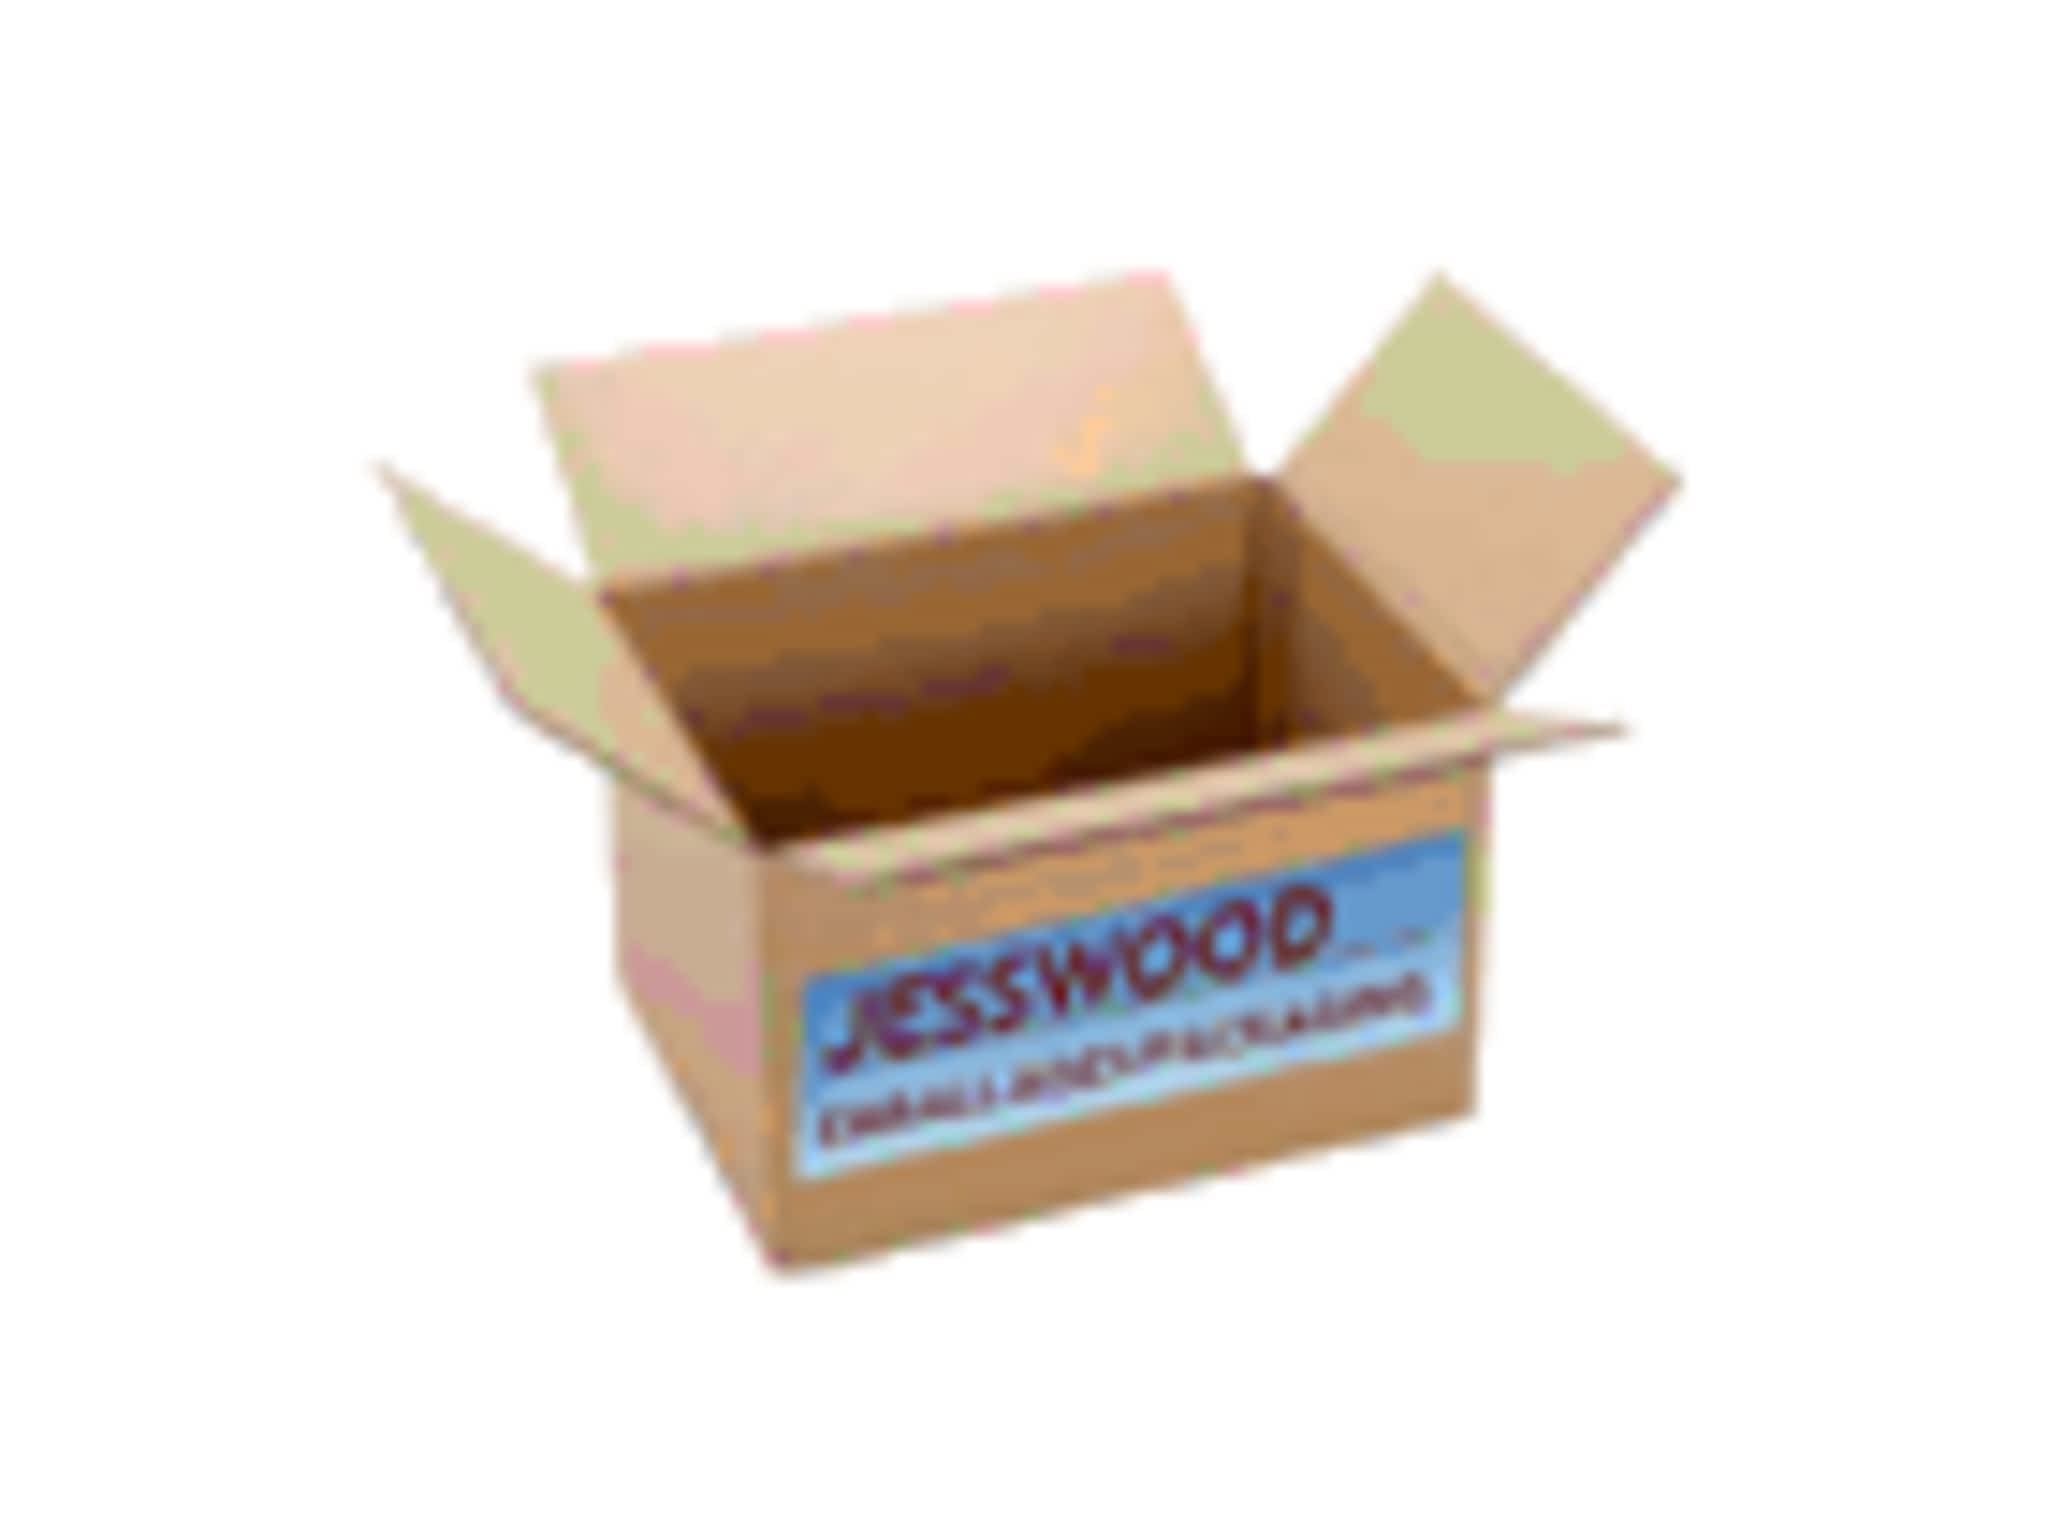 photo Jesswood Emballages Packaging Inc